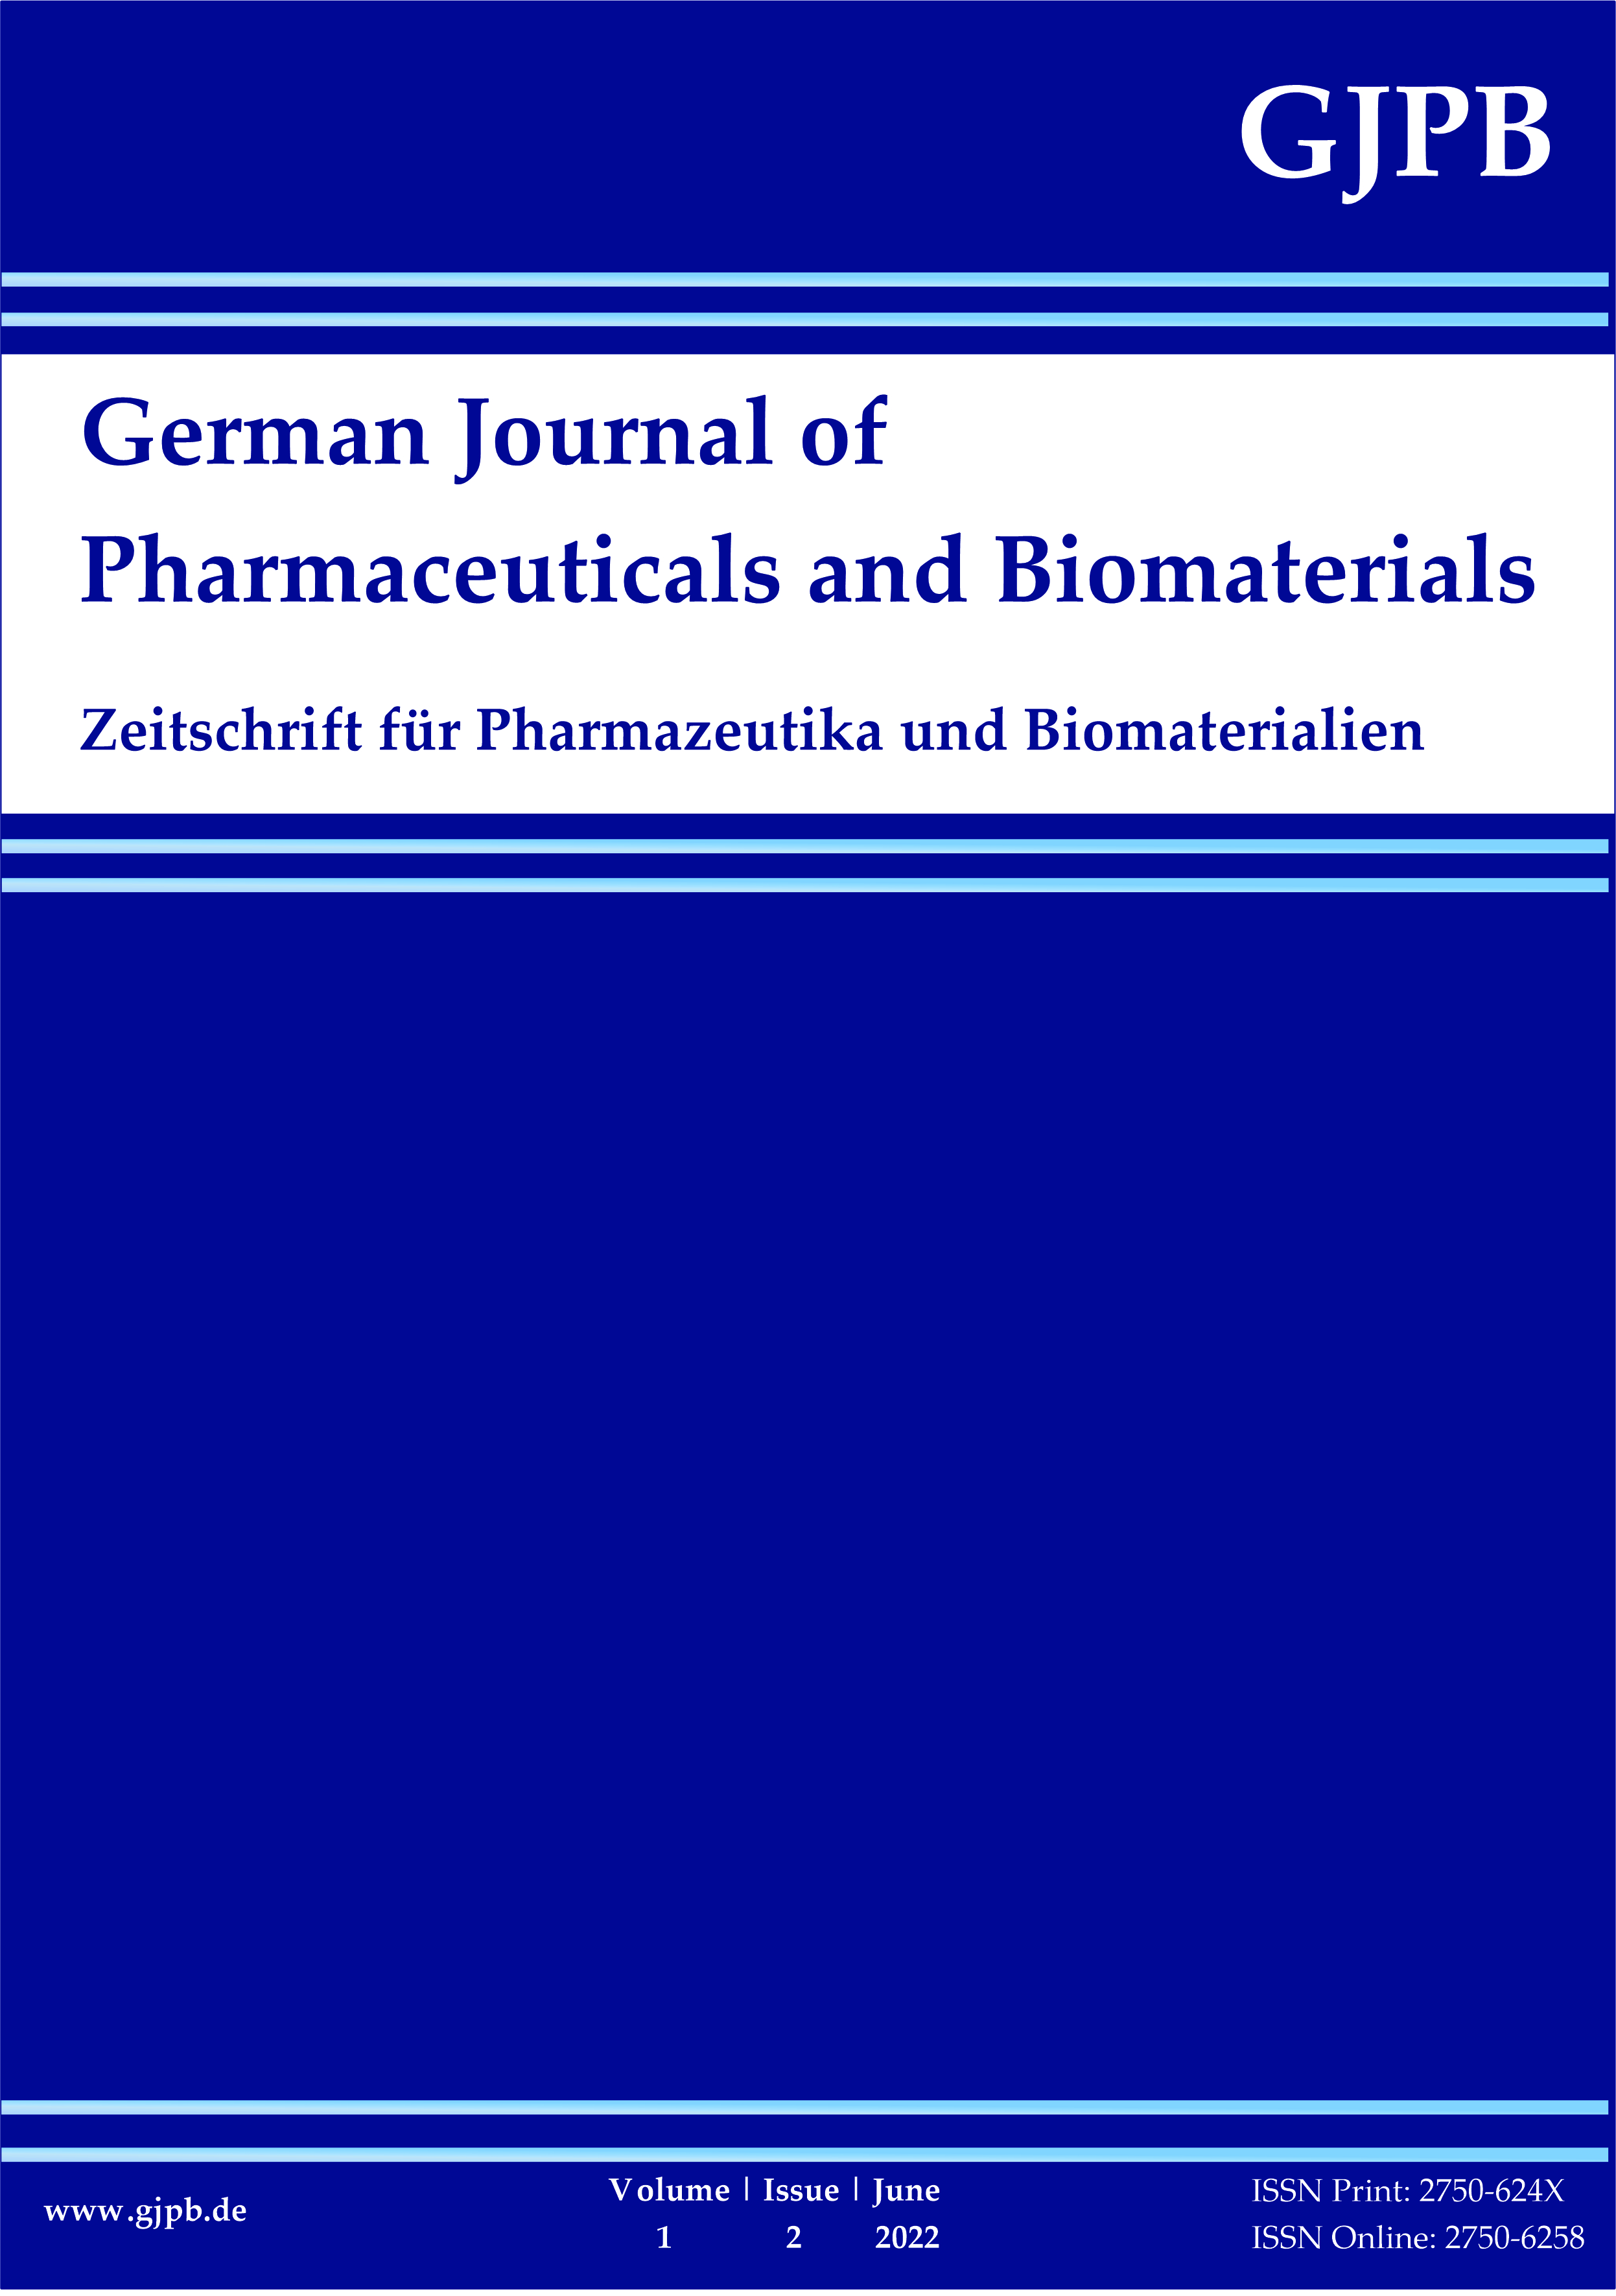 					View Vol. 1 No. 2 (2022): German Journal of Pharmaceuticals and Biomaterials
				